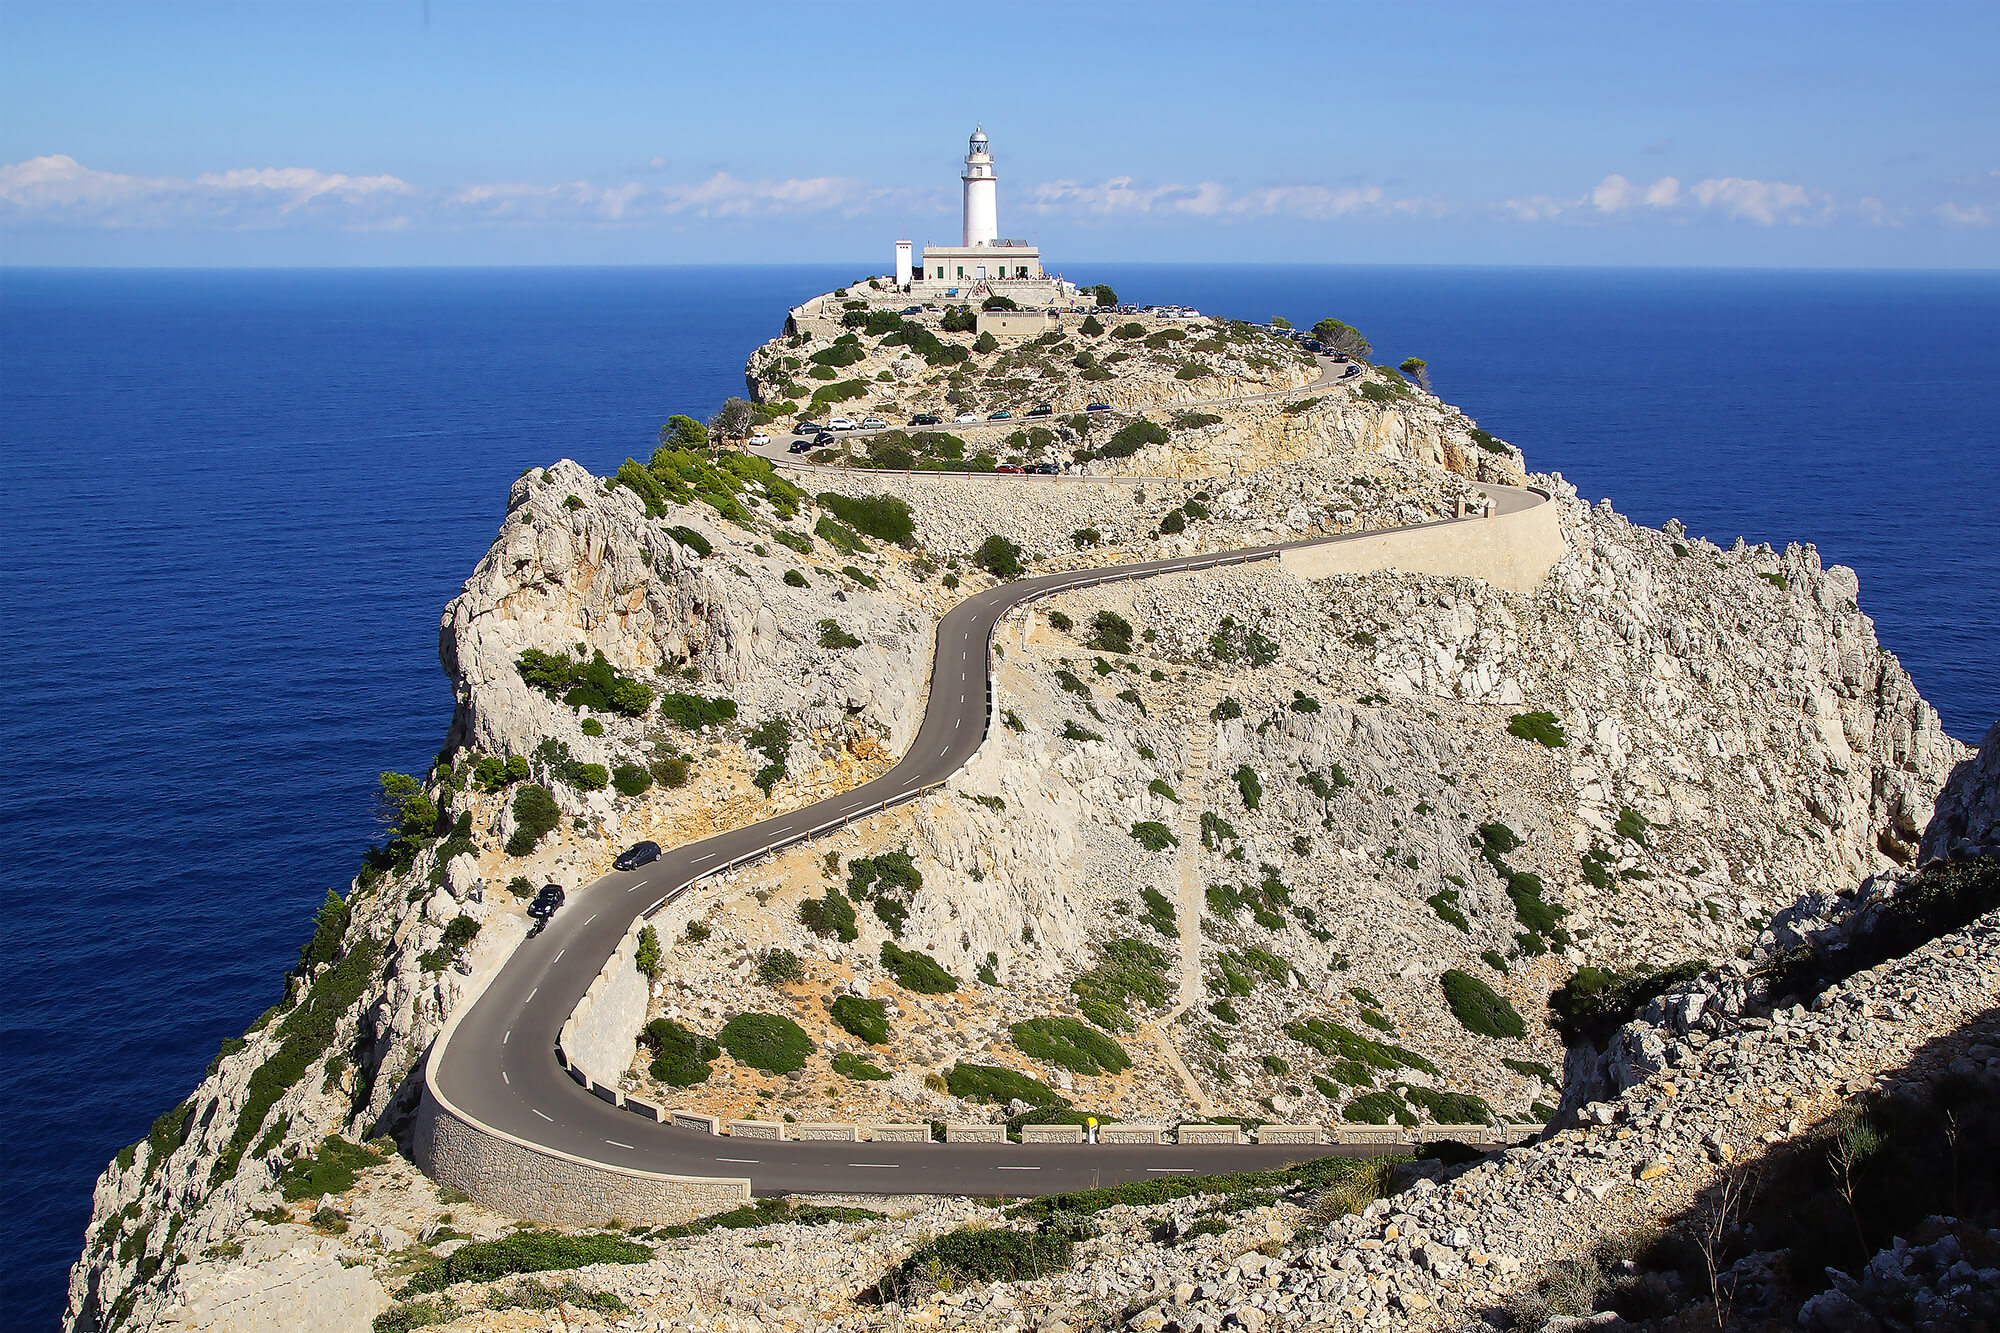 View of the lighthouse at Cap Formentor